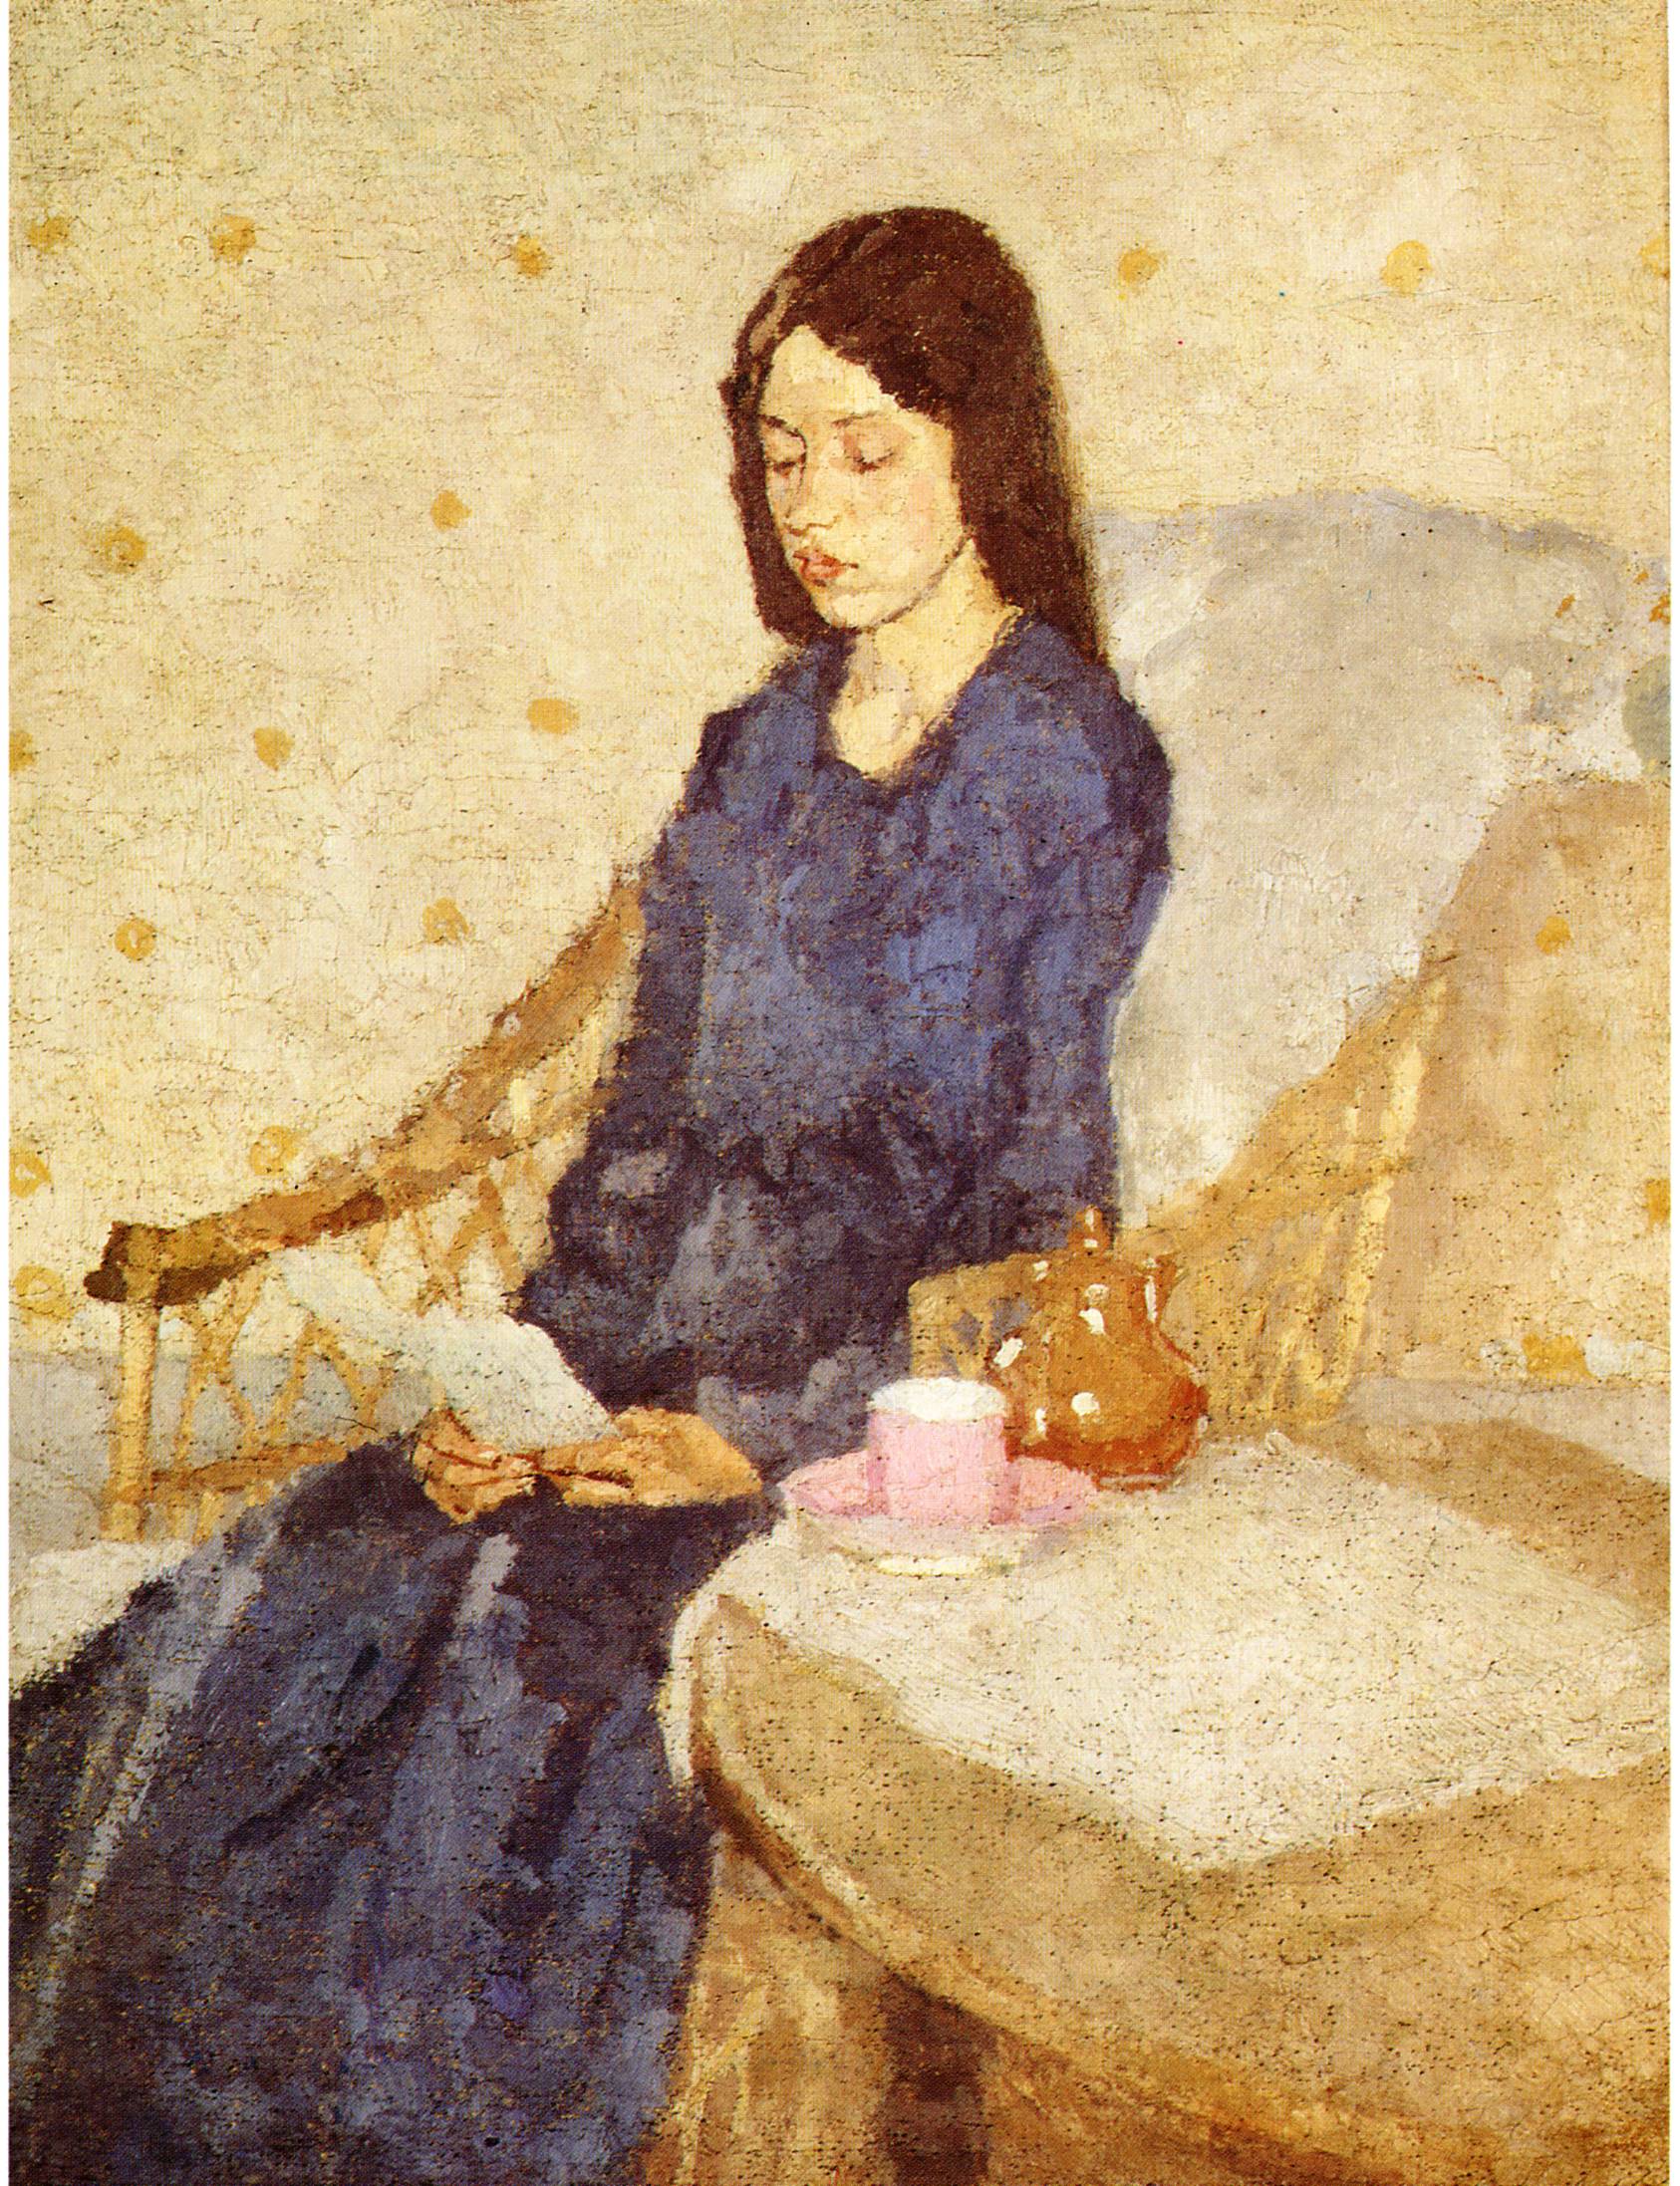 The Convalescent by Gwen John - 1924 - 41.2 x 33 cm The Fitzwilliam Museum